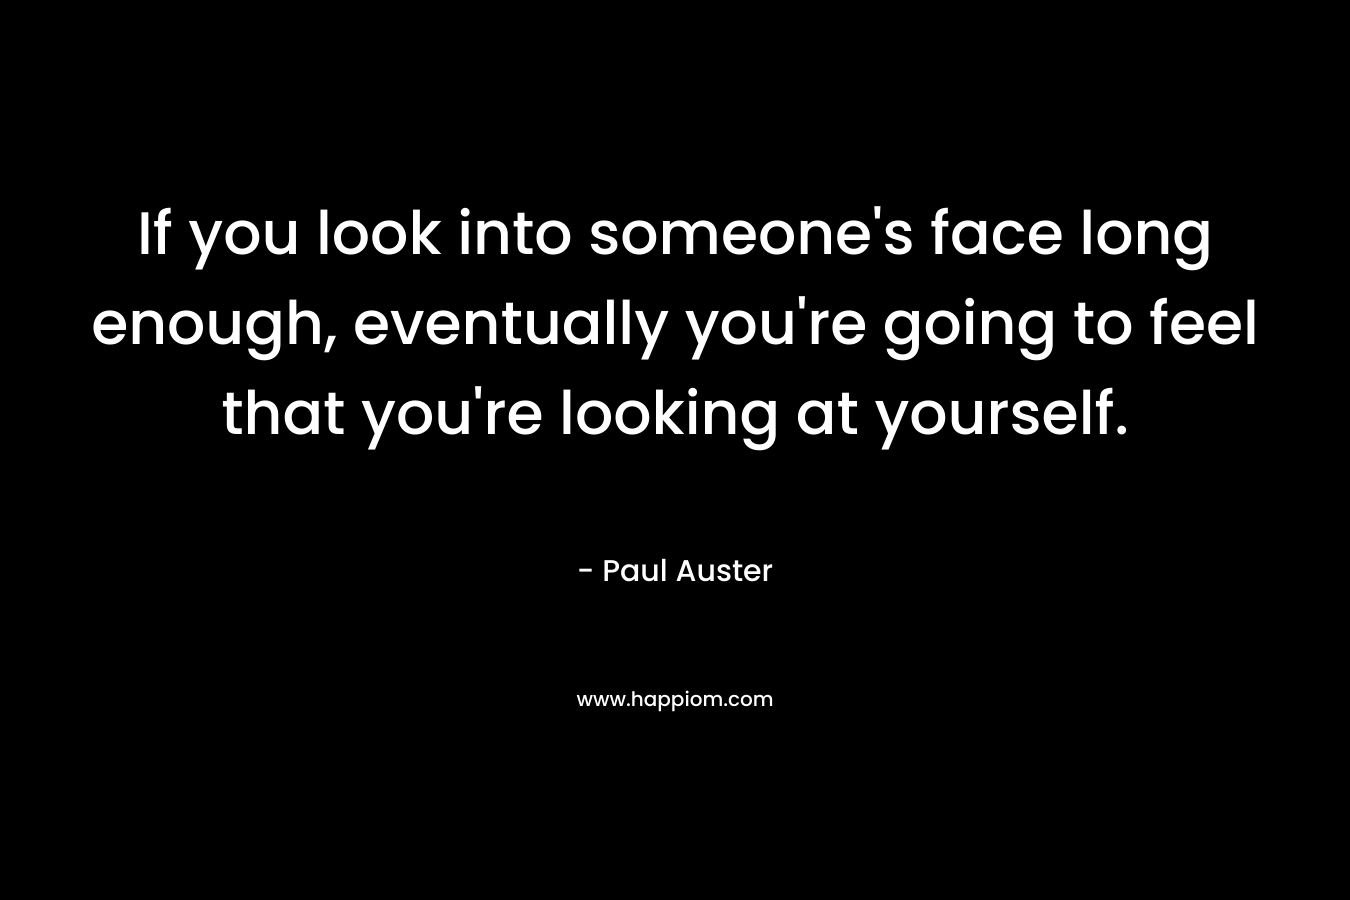 If you look into someone’s face long enough, eventually you’re going to feel that you’re looking at yourself. – Paul Auster